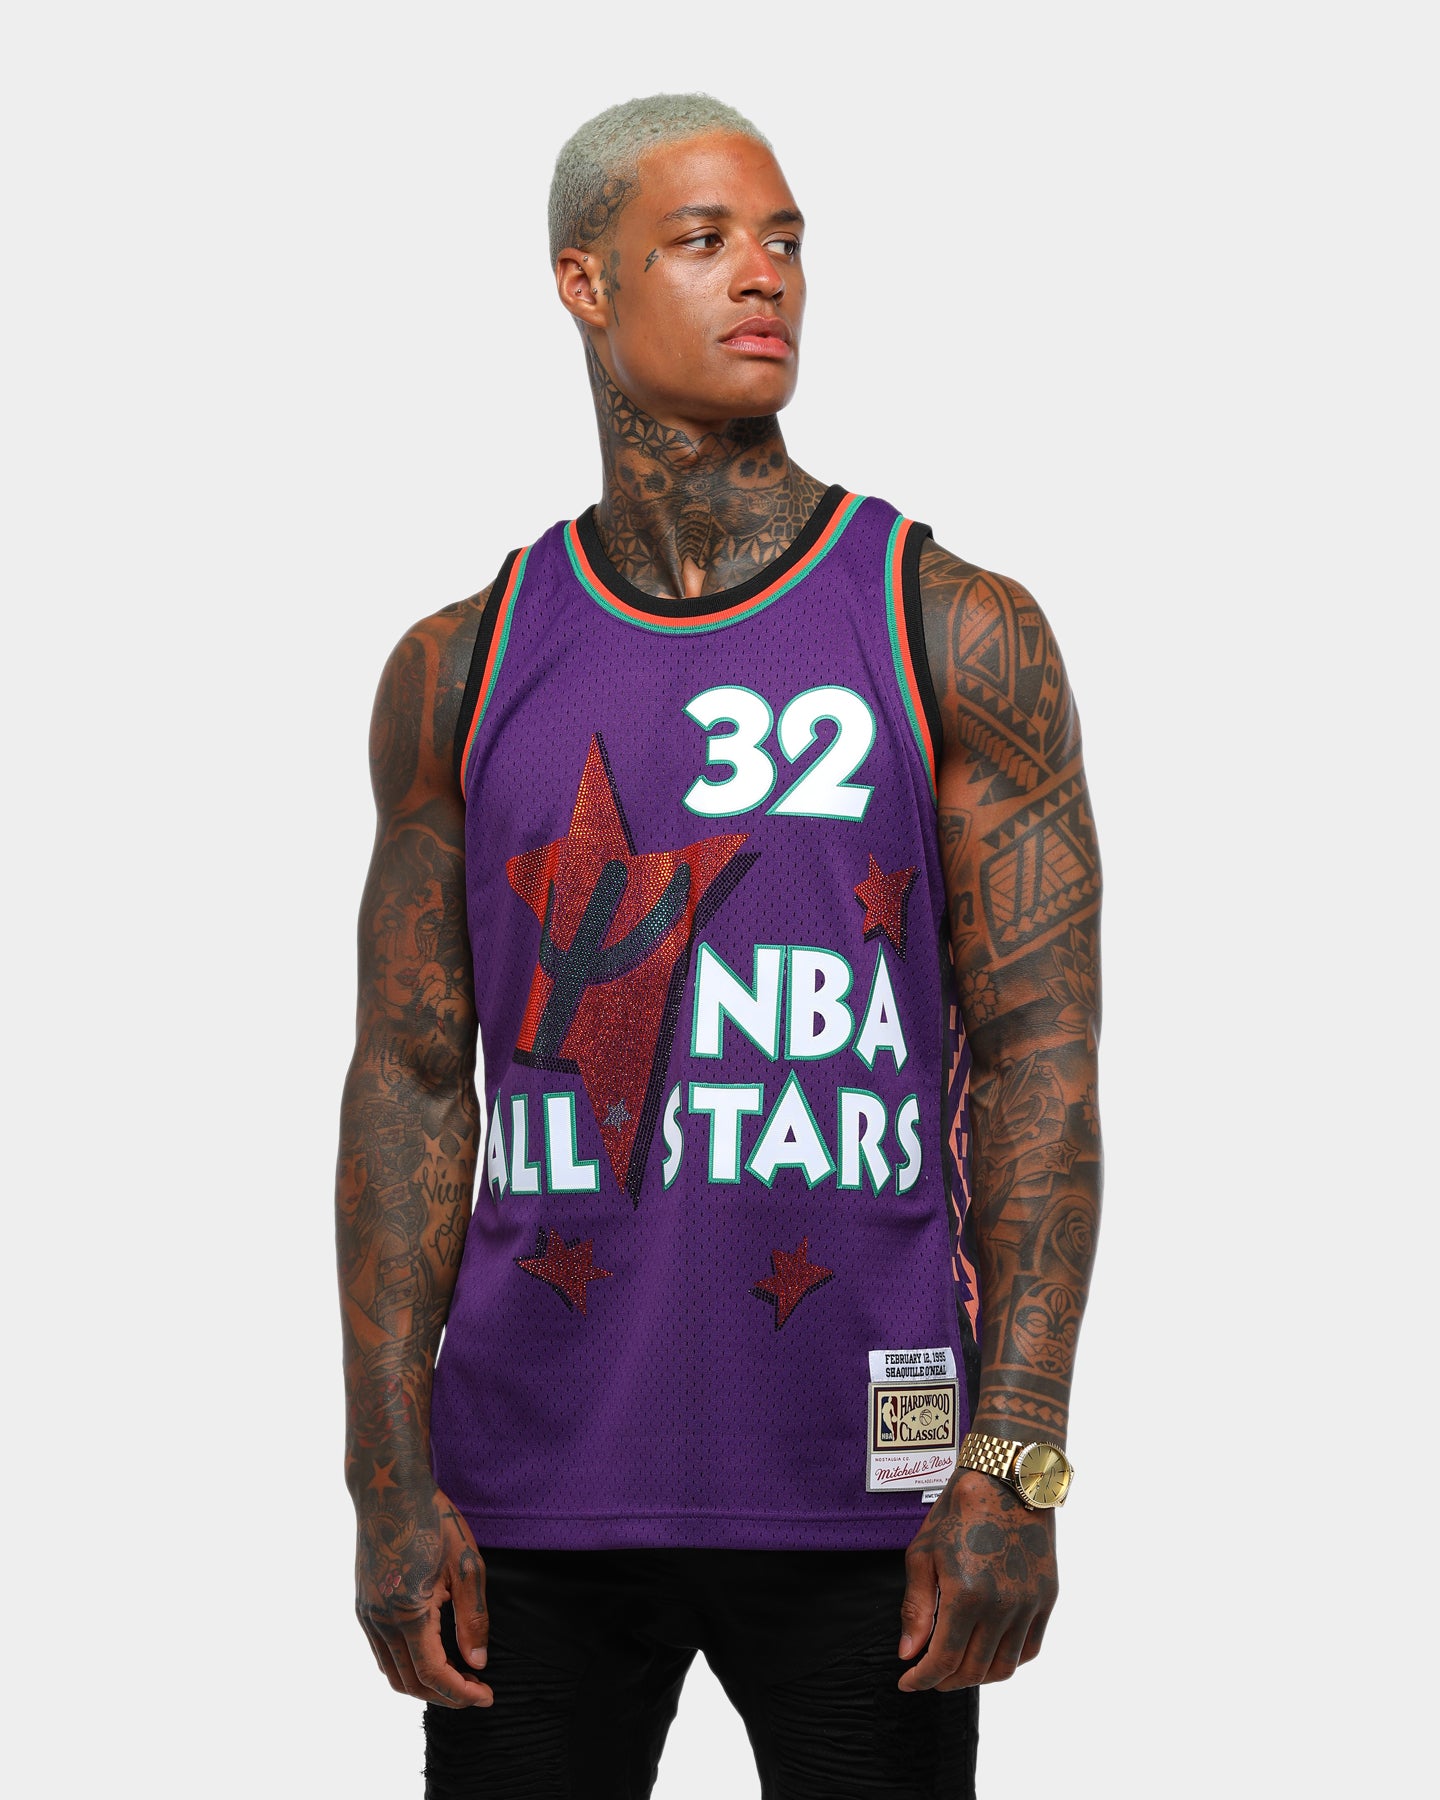 95 all star game jersey